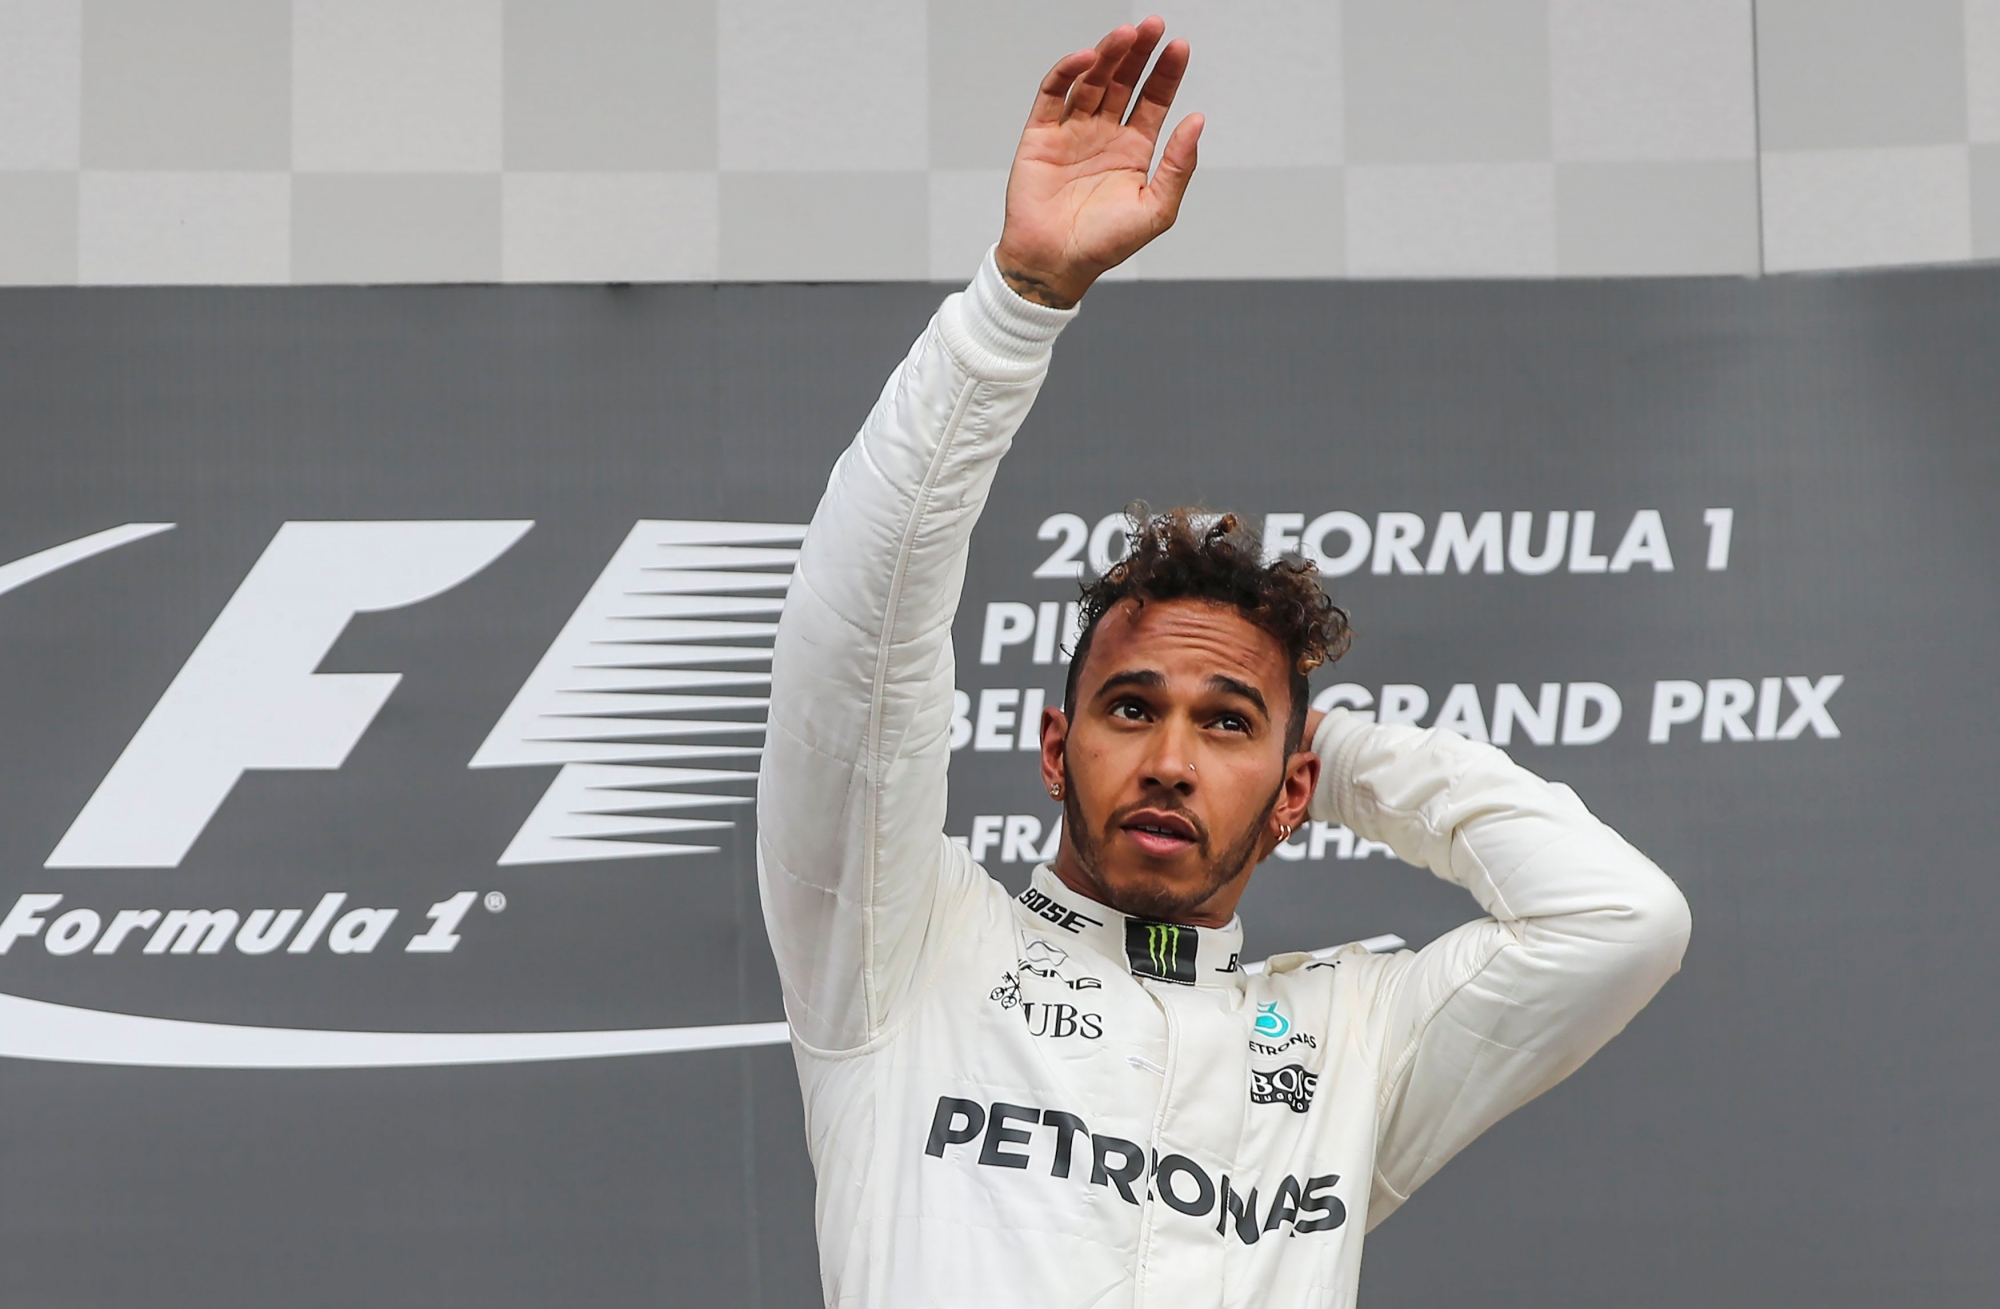 epa06166278 The winner, British Formula One driver Lewis Hamilton of Mercedes AMG GP celebrates on the podium after the 2017 Formula One Grand Prix of Belgium at the Spa-Francorchamps race track near Francorchamps, Belgium, 27 August 2017.  EPA/SRDJAN SUKI BELGIUM FORMULA ONE GRAND PRIX